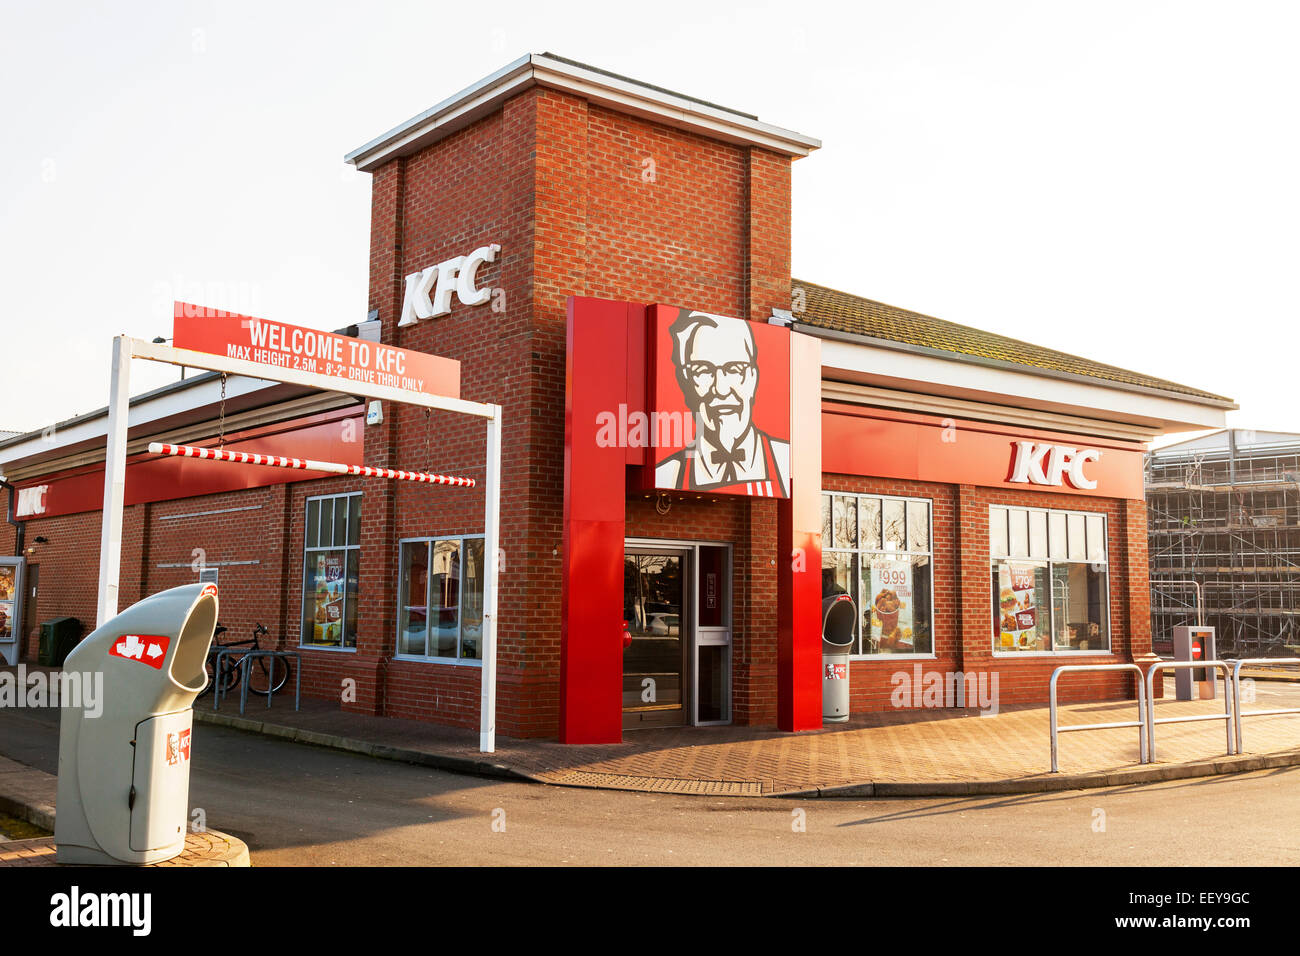 kfc shop restaurant fried chicken sign exterior building facade Grimsby Town Lincolnshire Humberside UK England Stock Photo